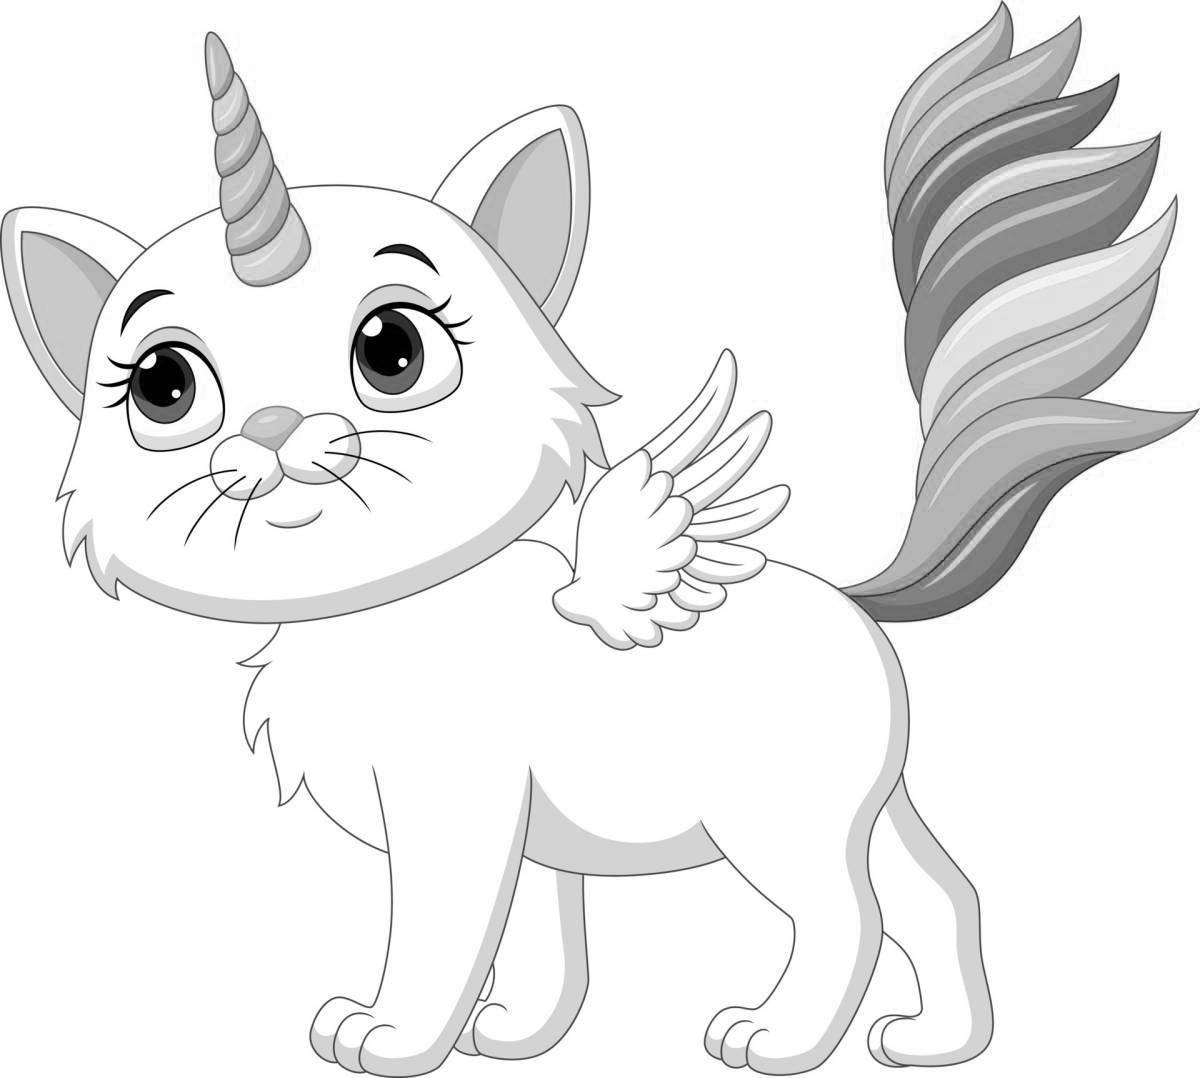 Elegant unicorn coloring pages for girls